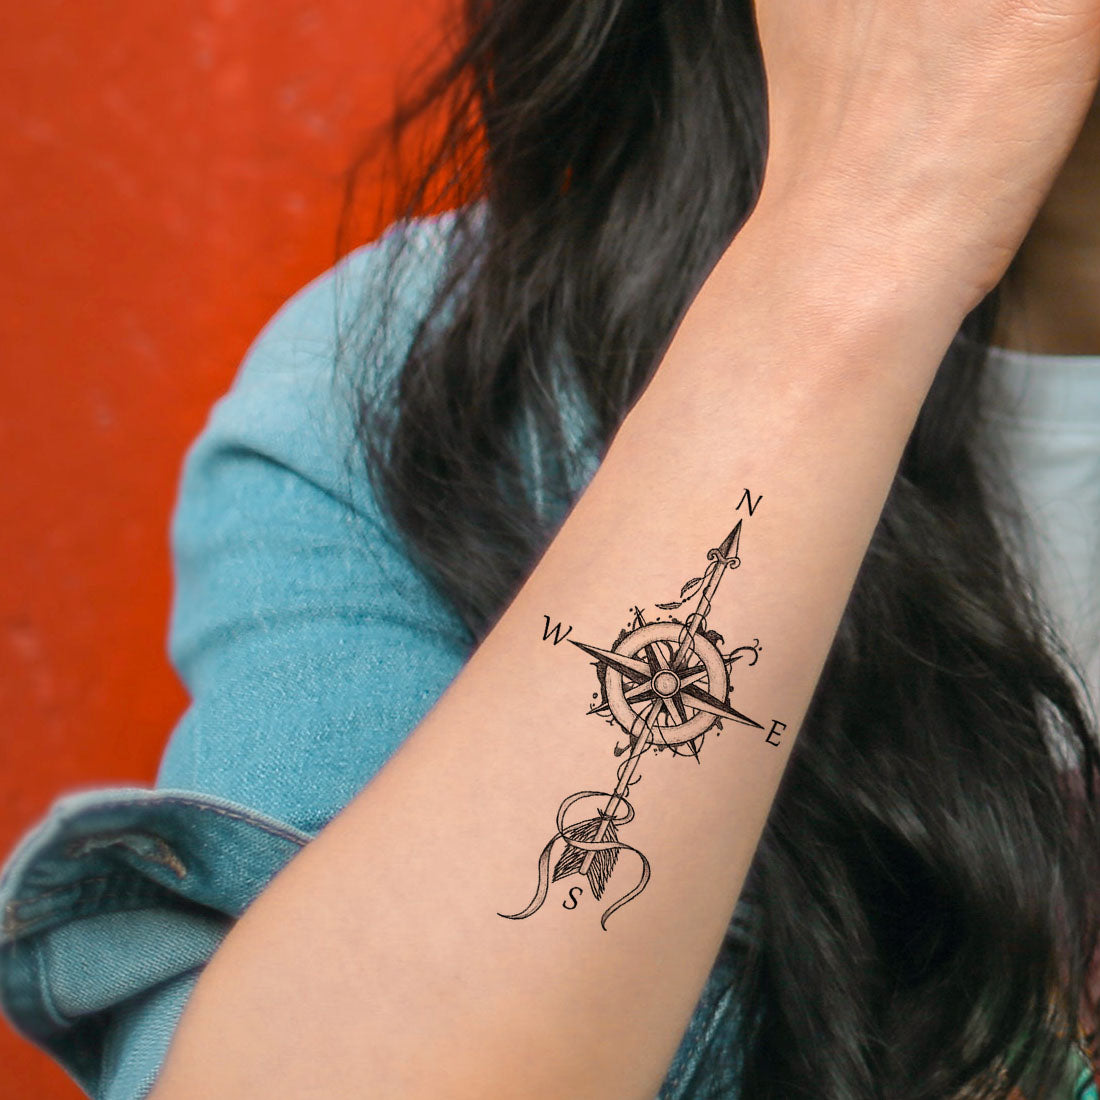 Abstract compass and arrow tattoo by SelfmadeTattooBerlin on DeviantArt